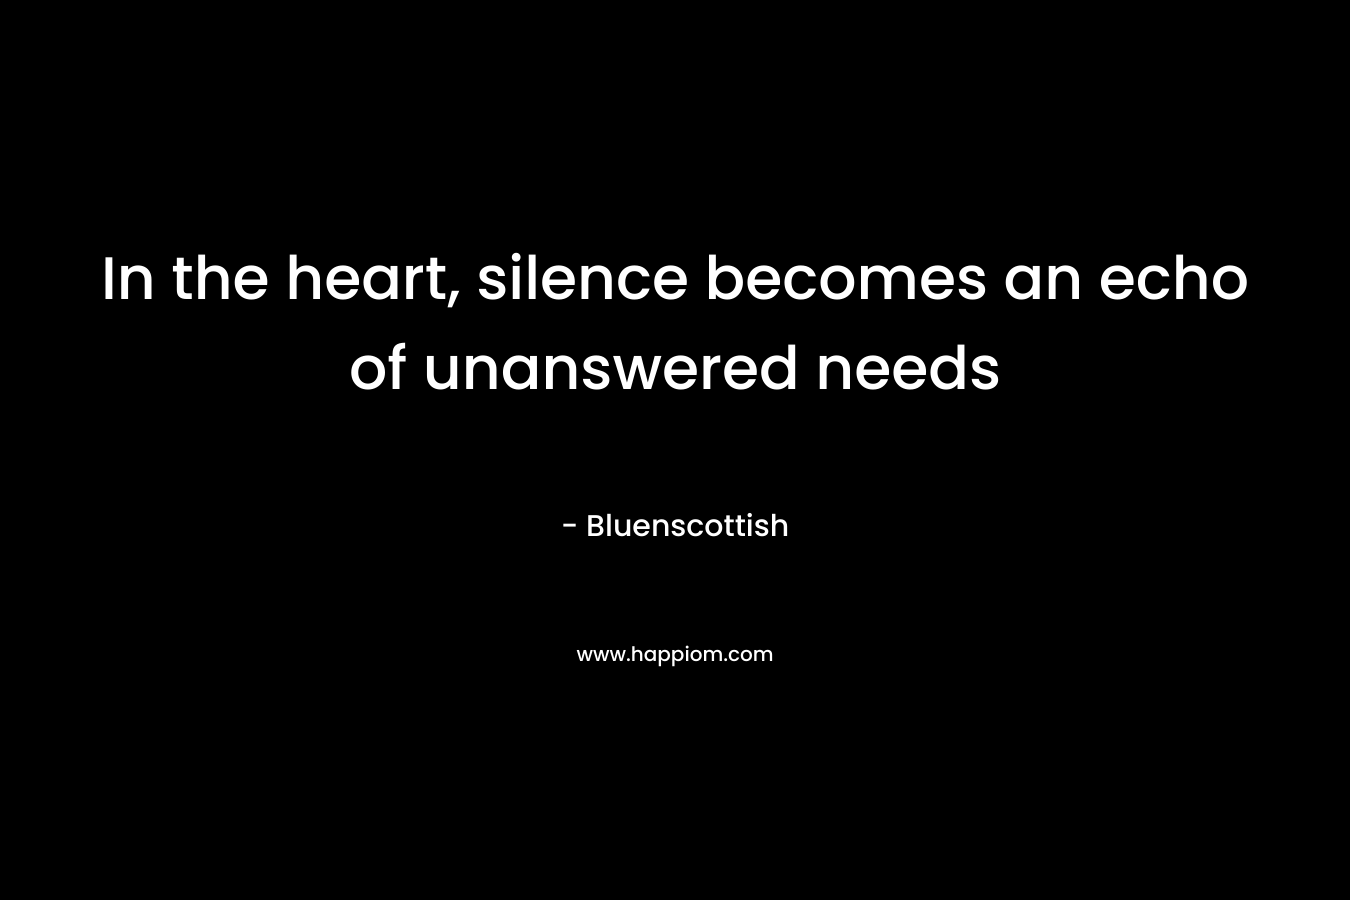 In the heart, silence becomes an echo of unanswered needs